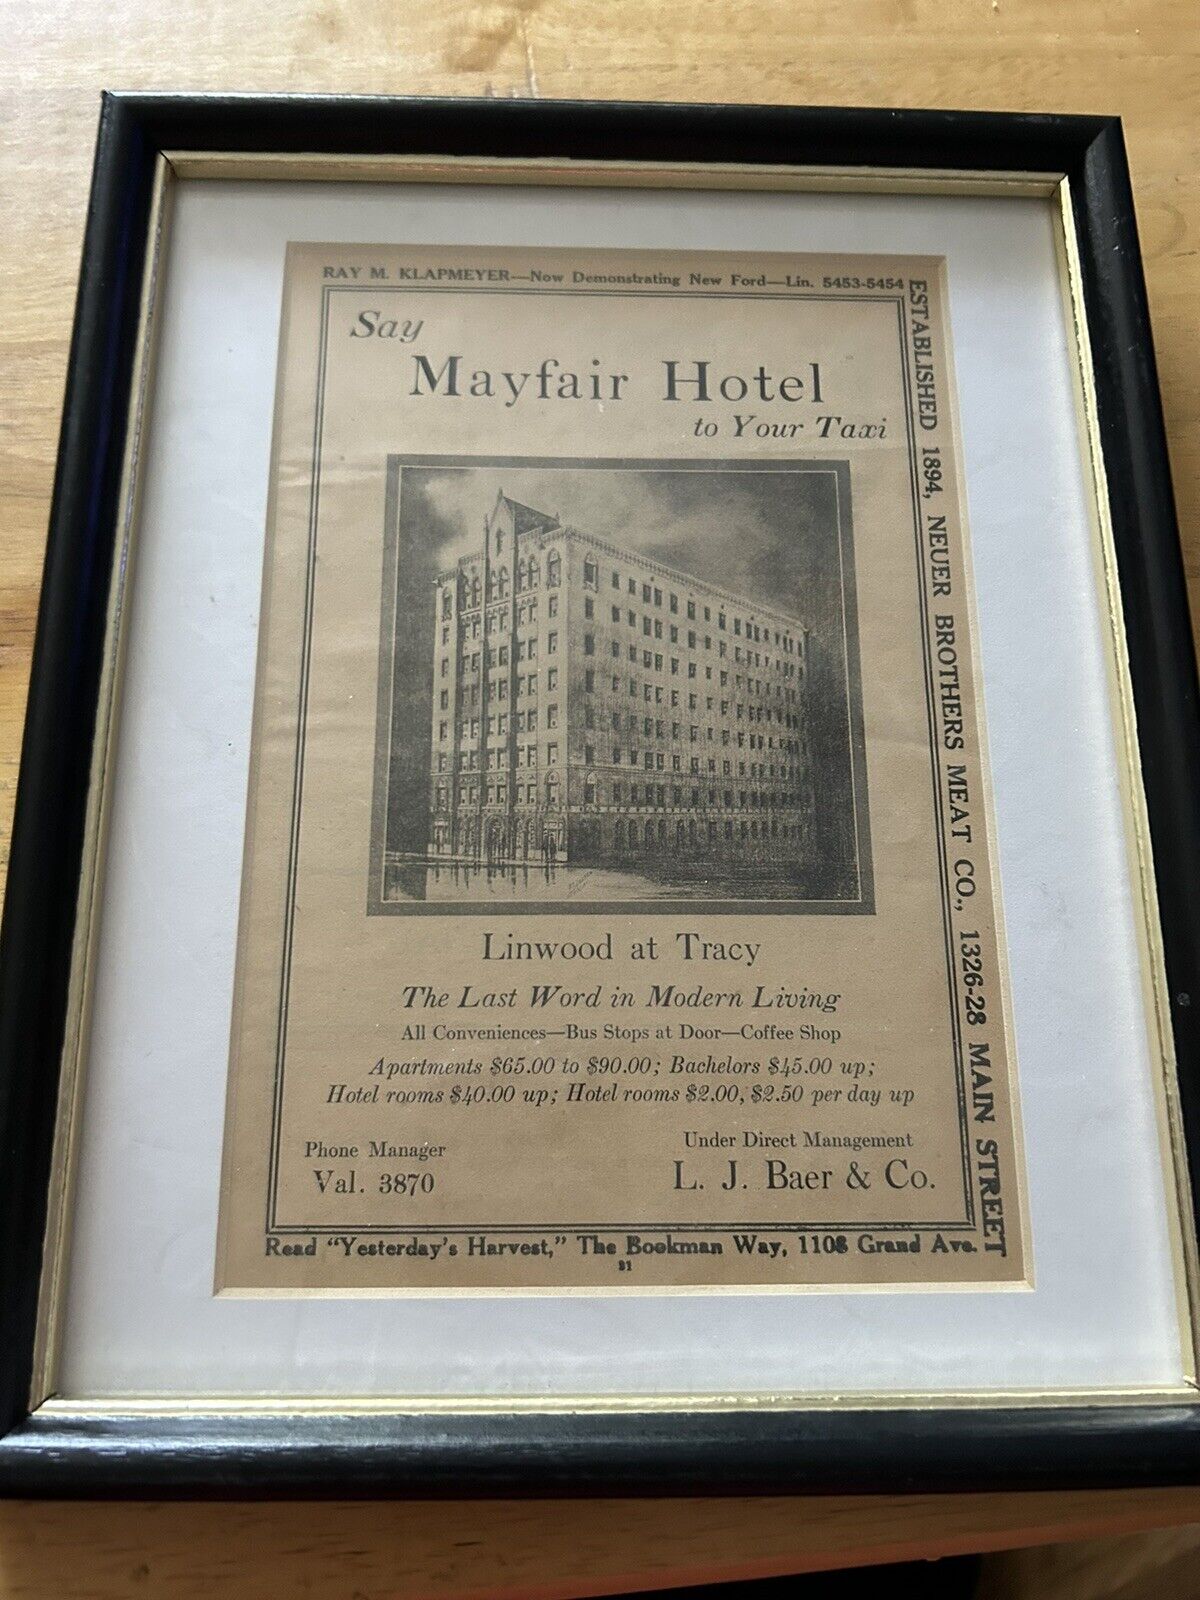 VINTAGE ADVERTISING PIECE FOR: MAYFAIR HOTEL--FRAMED 8X10 INCHES